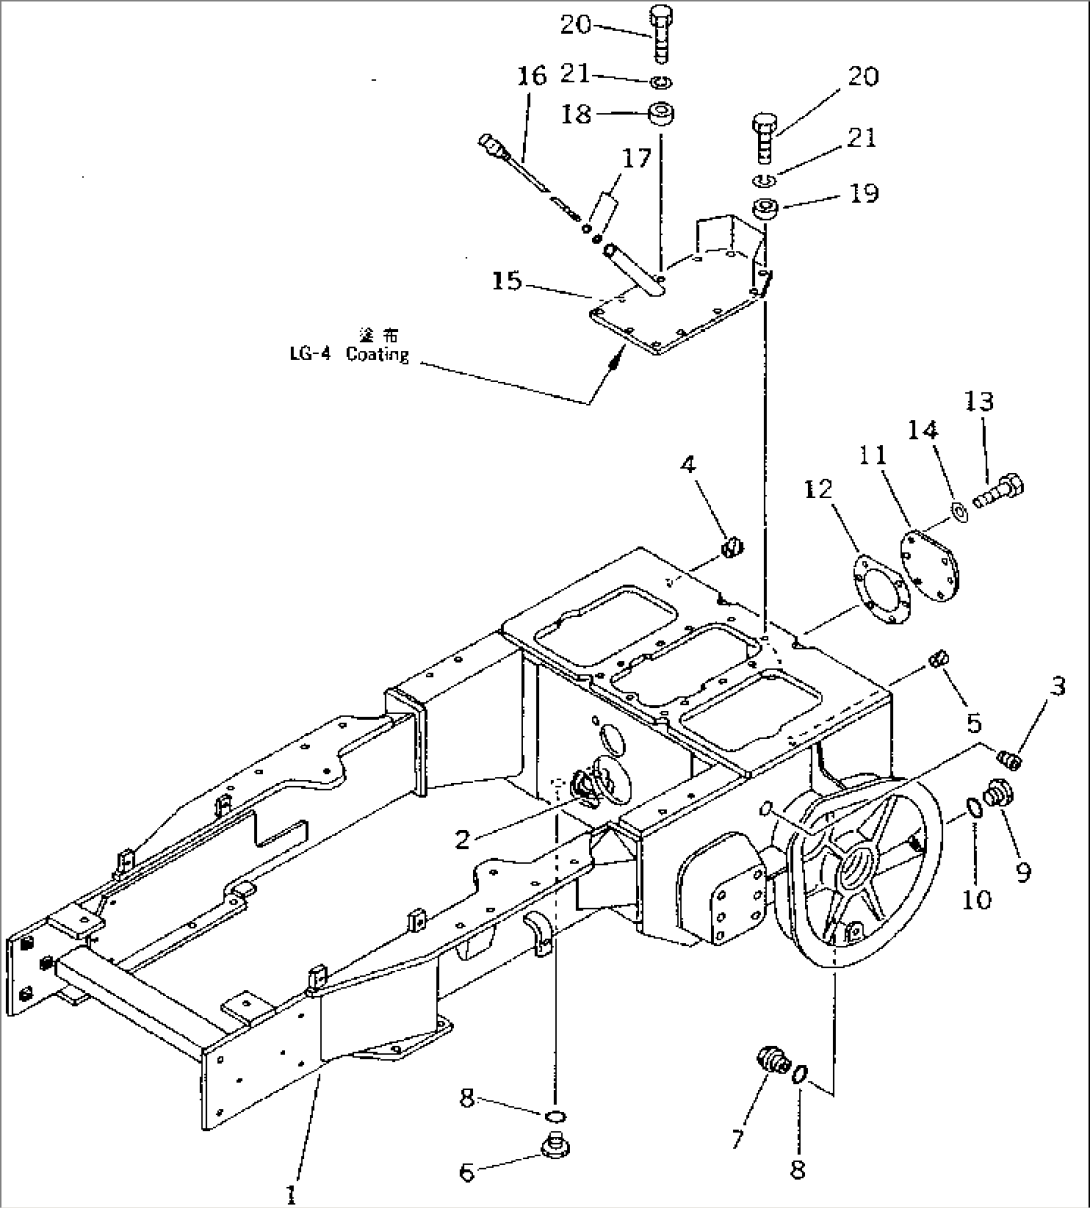 STEERING CASE AND MAIN FRAME (FOR MONO LEVER STEERING)